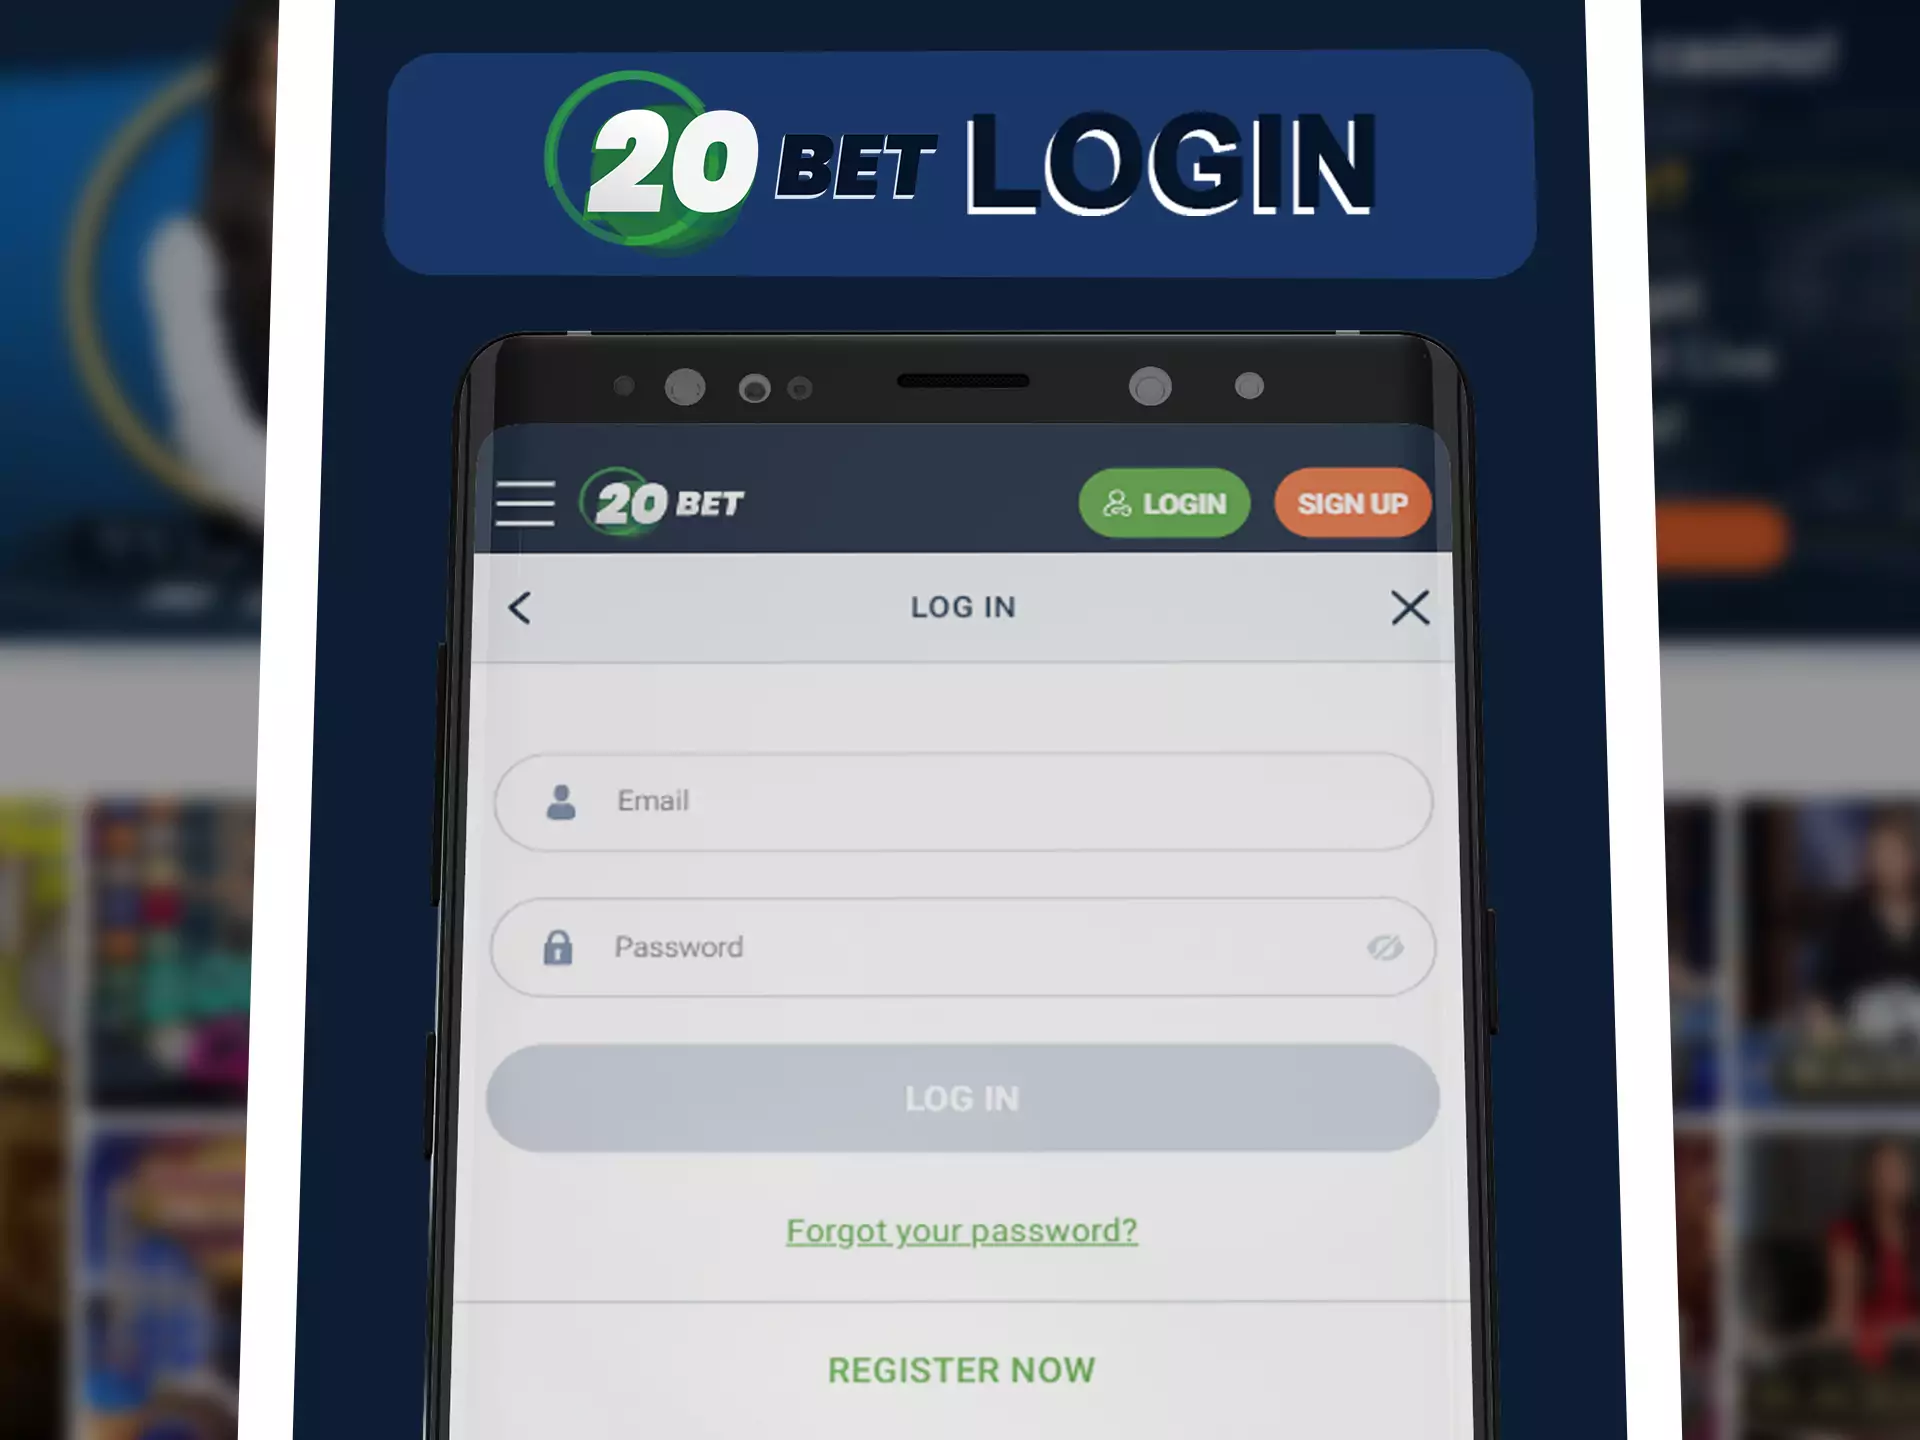 Log in to continue working with the application.